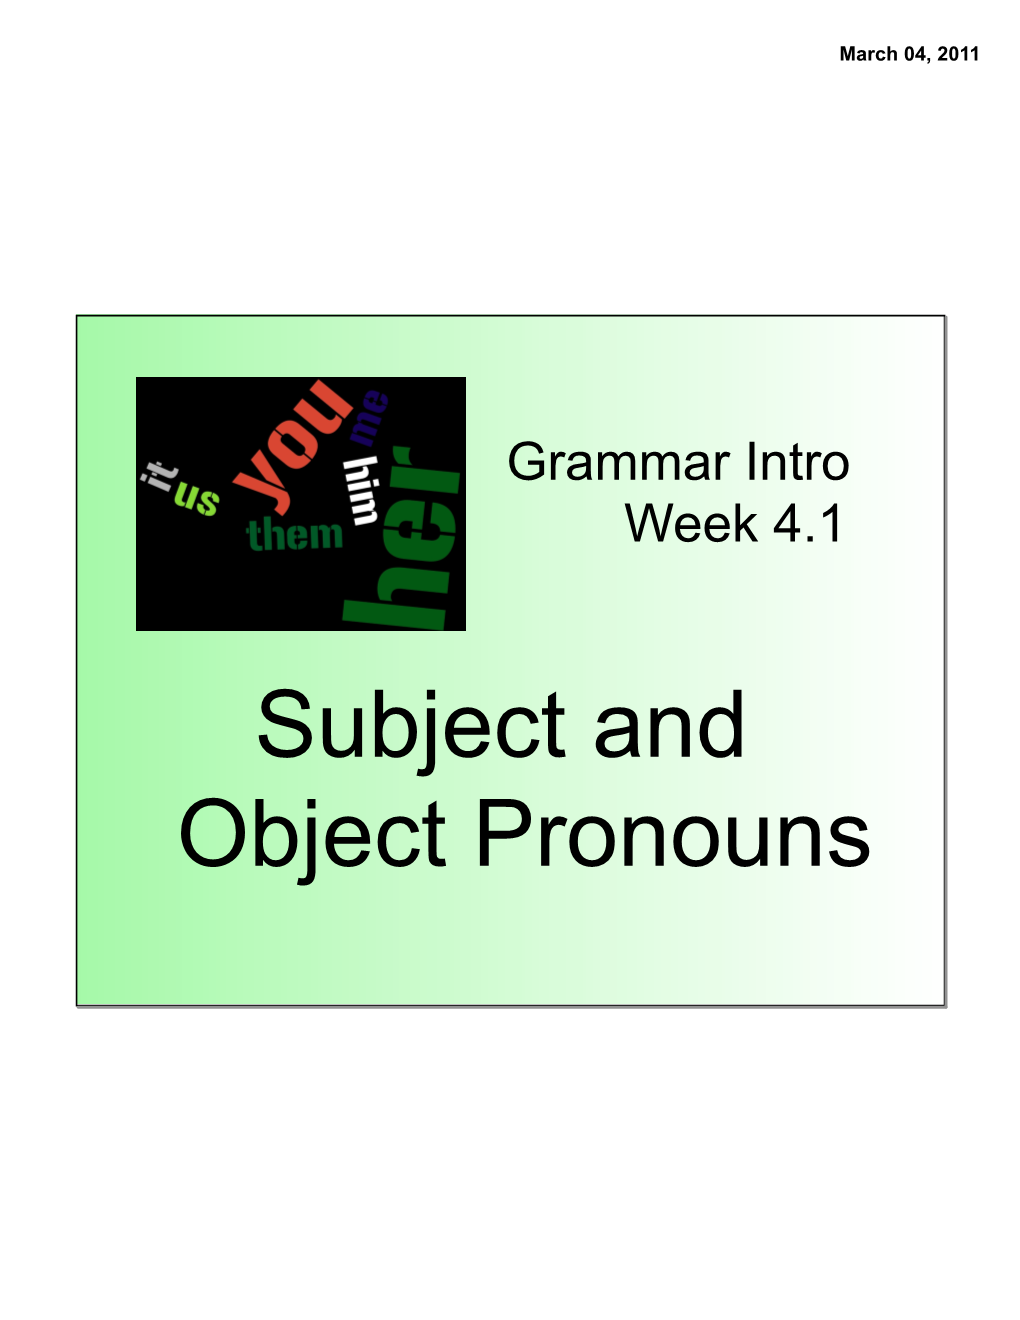 Subject and Object Pronouns March 04, 2011